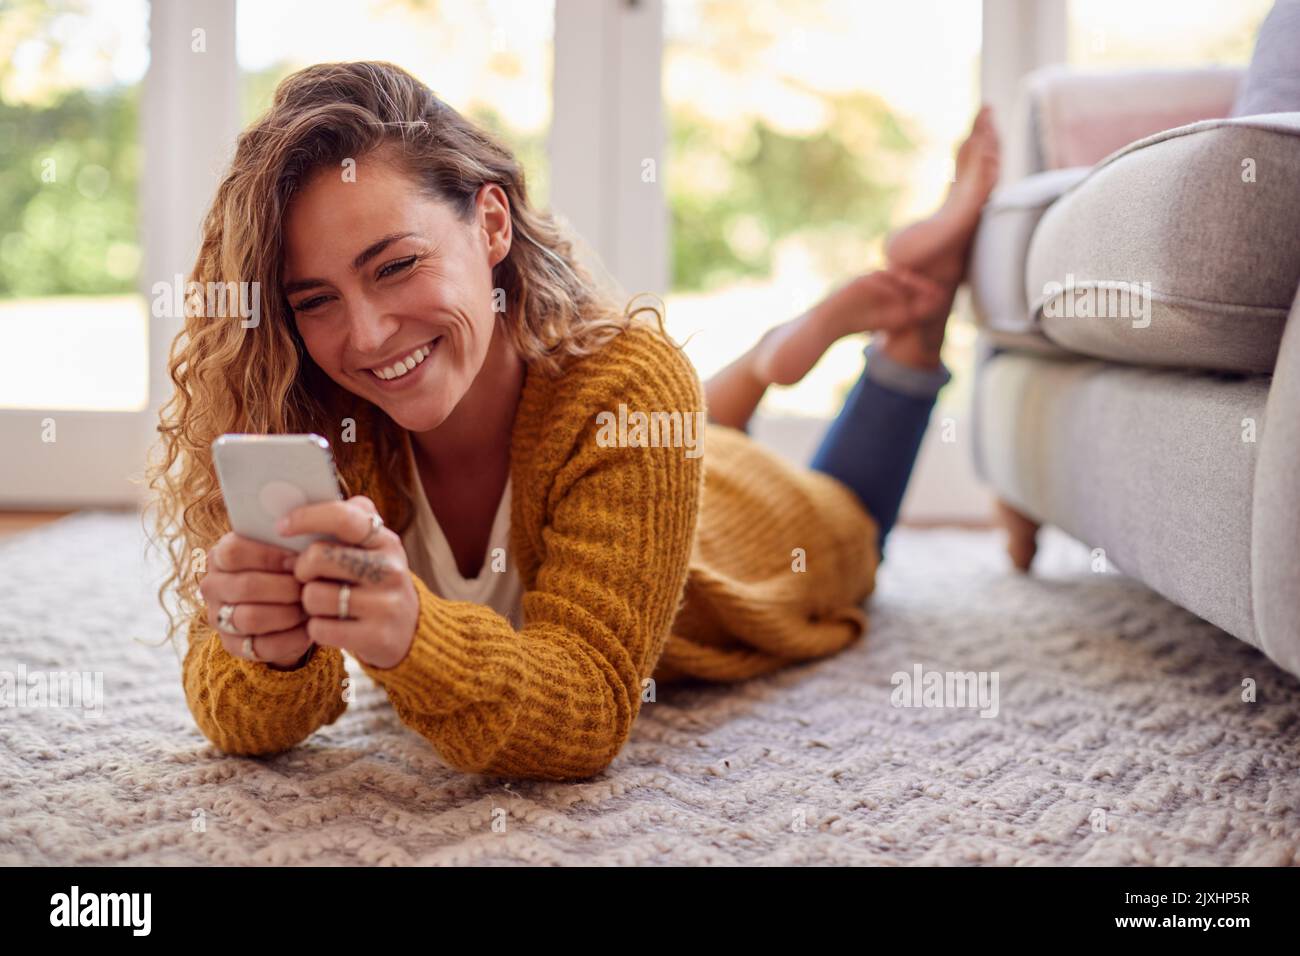 Woman In Warm Jumper Lying On Floor At Home Using Mobile Phone Stock Photo